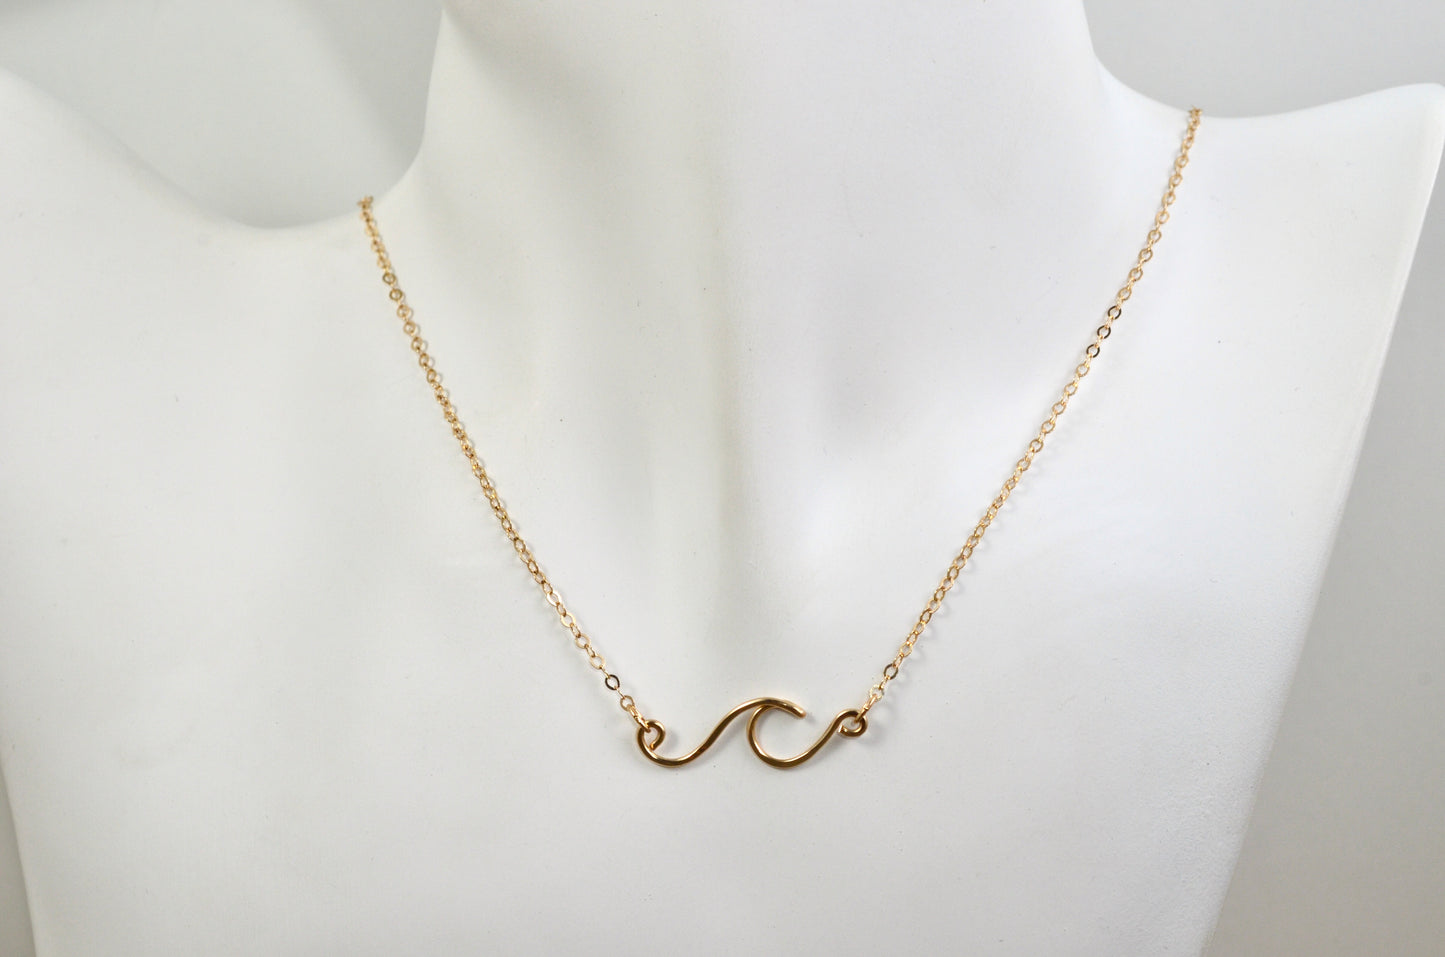 Wave necklace in Sterling Silver or 14k Gold Filled, ocean beach surf jewelry